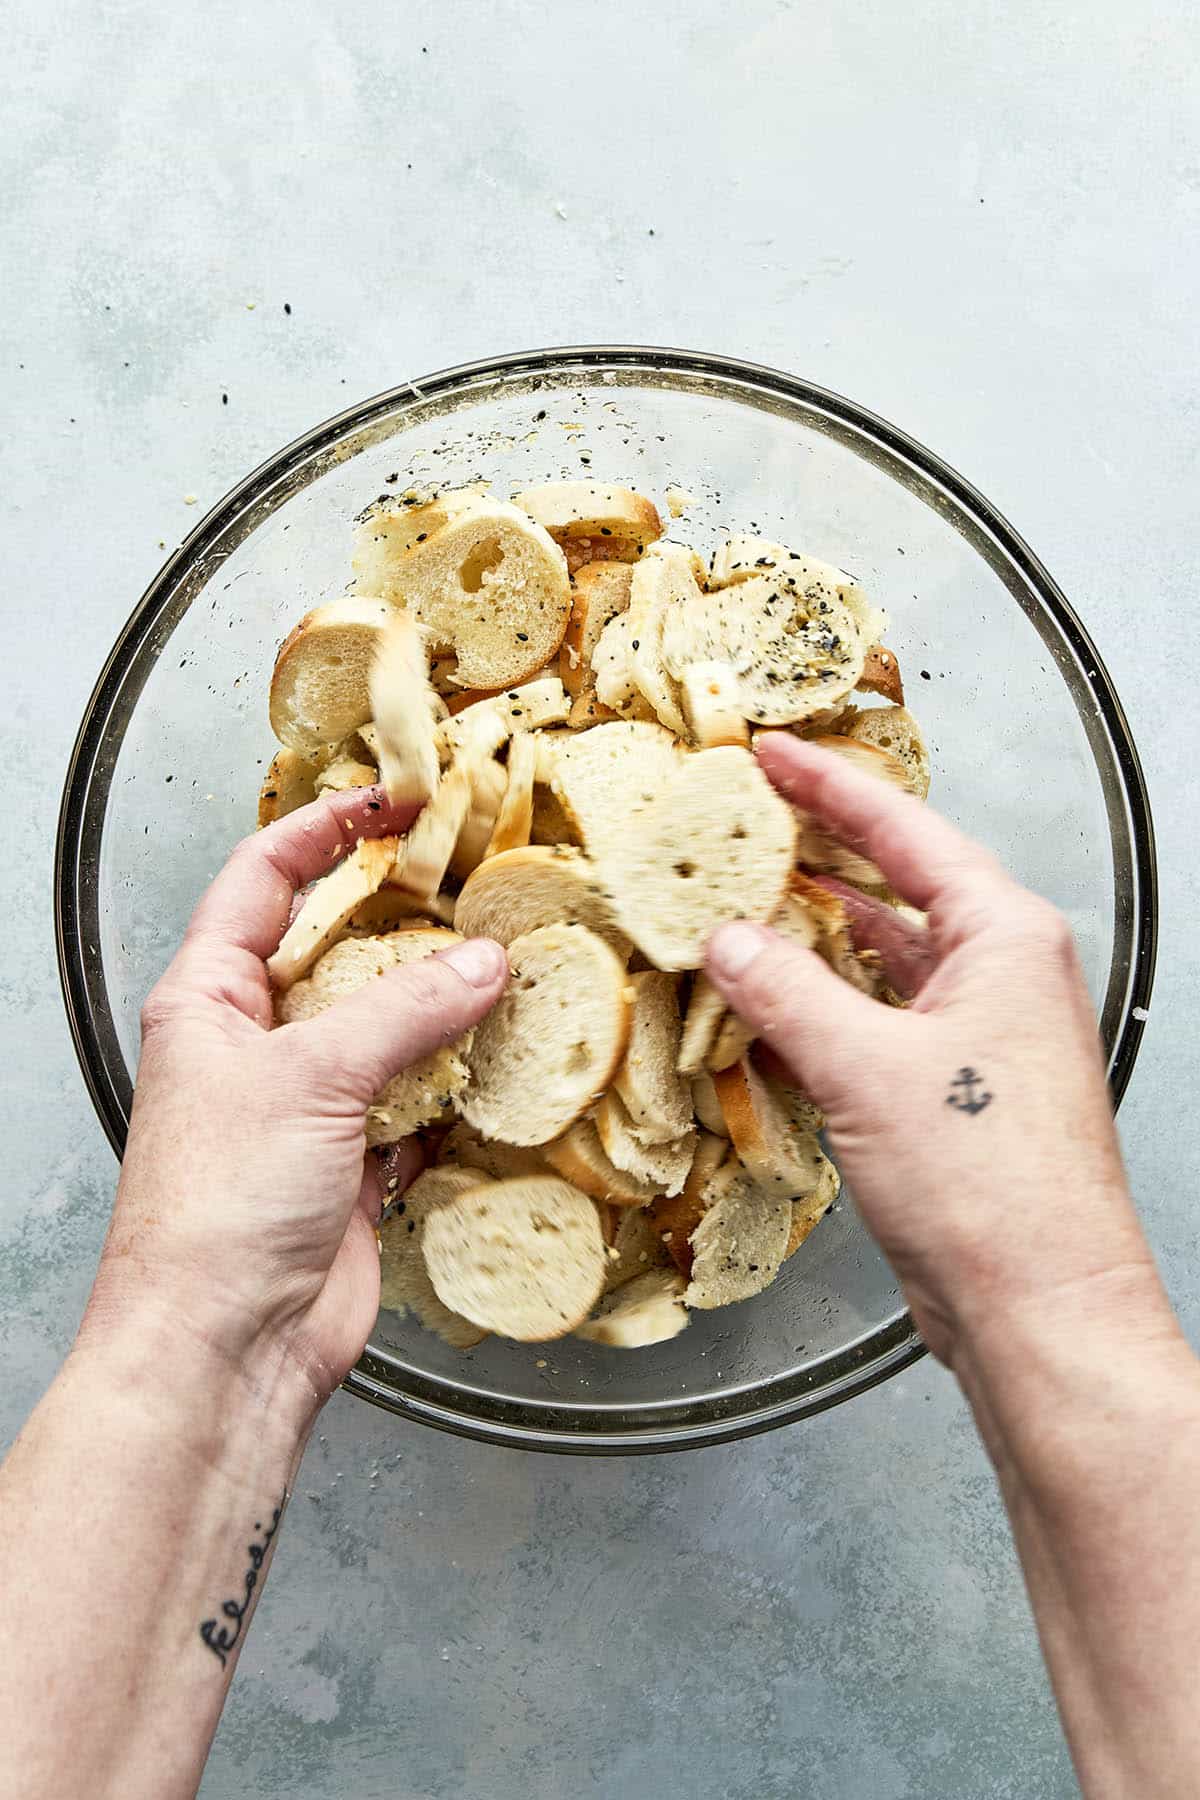 Hands tossing sliced bread pieces in a large bowl.